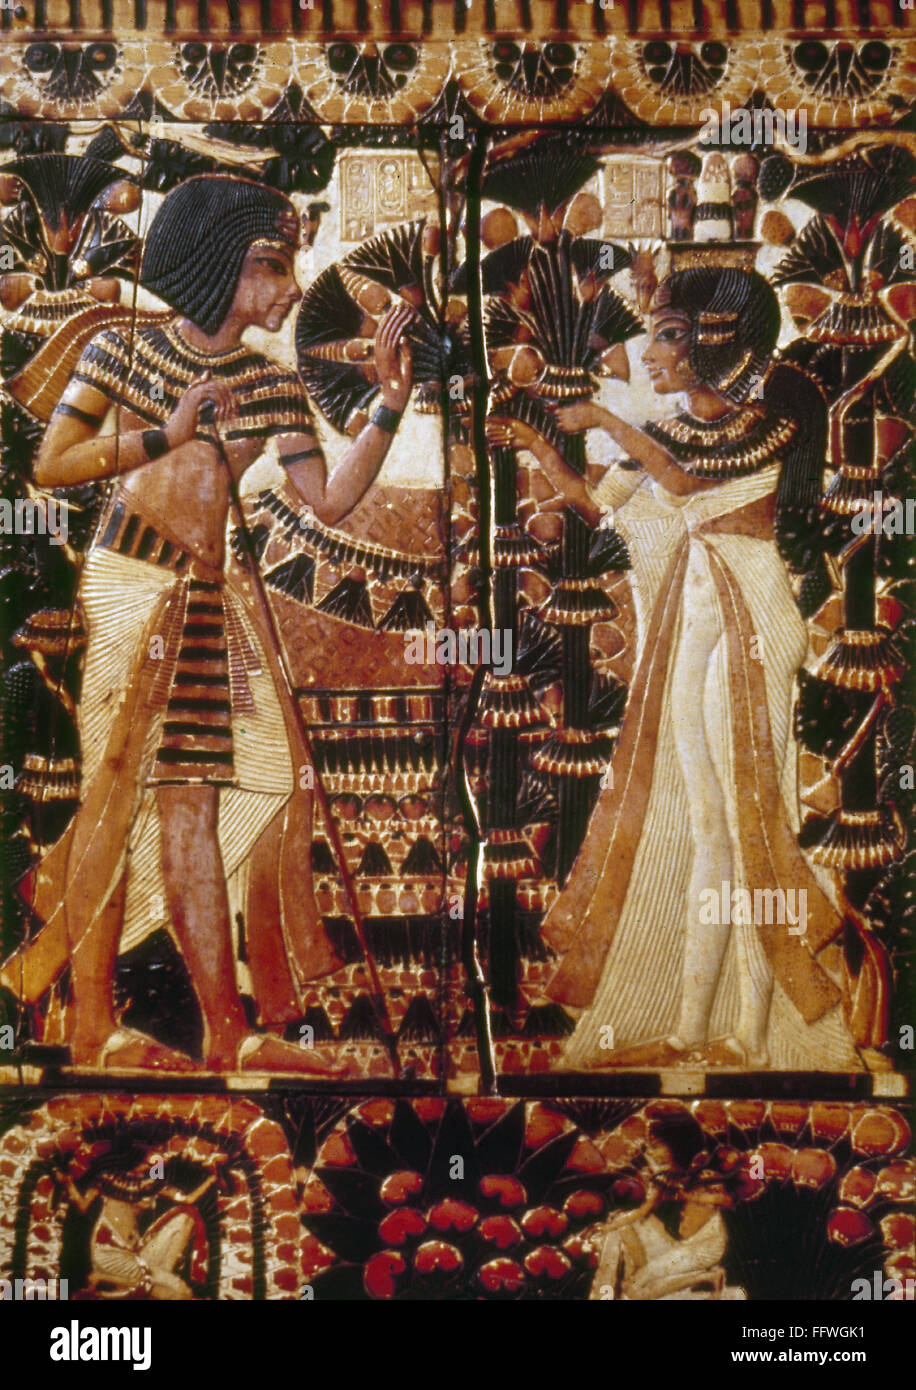 TOMB OF KING TUTANKHAMEN. /nTutankhamen and his queen, Ankhesenamun. Painted ivory panel from the lid of a wooden chest, 14th century B.C. Stock Photo